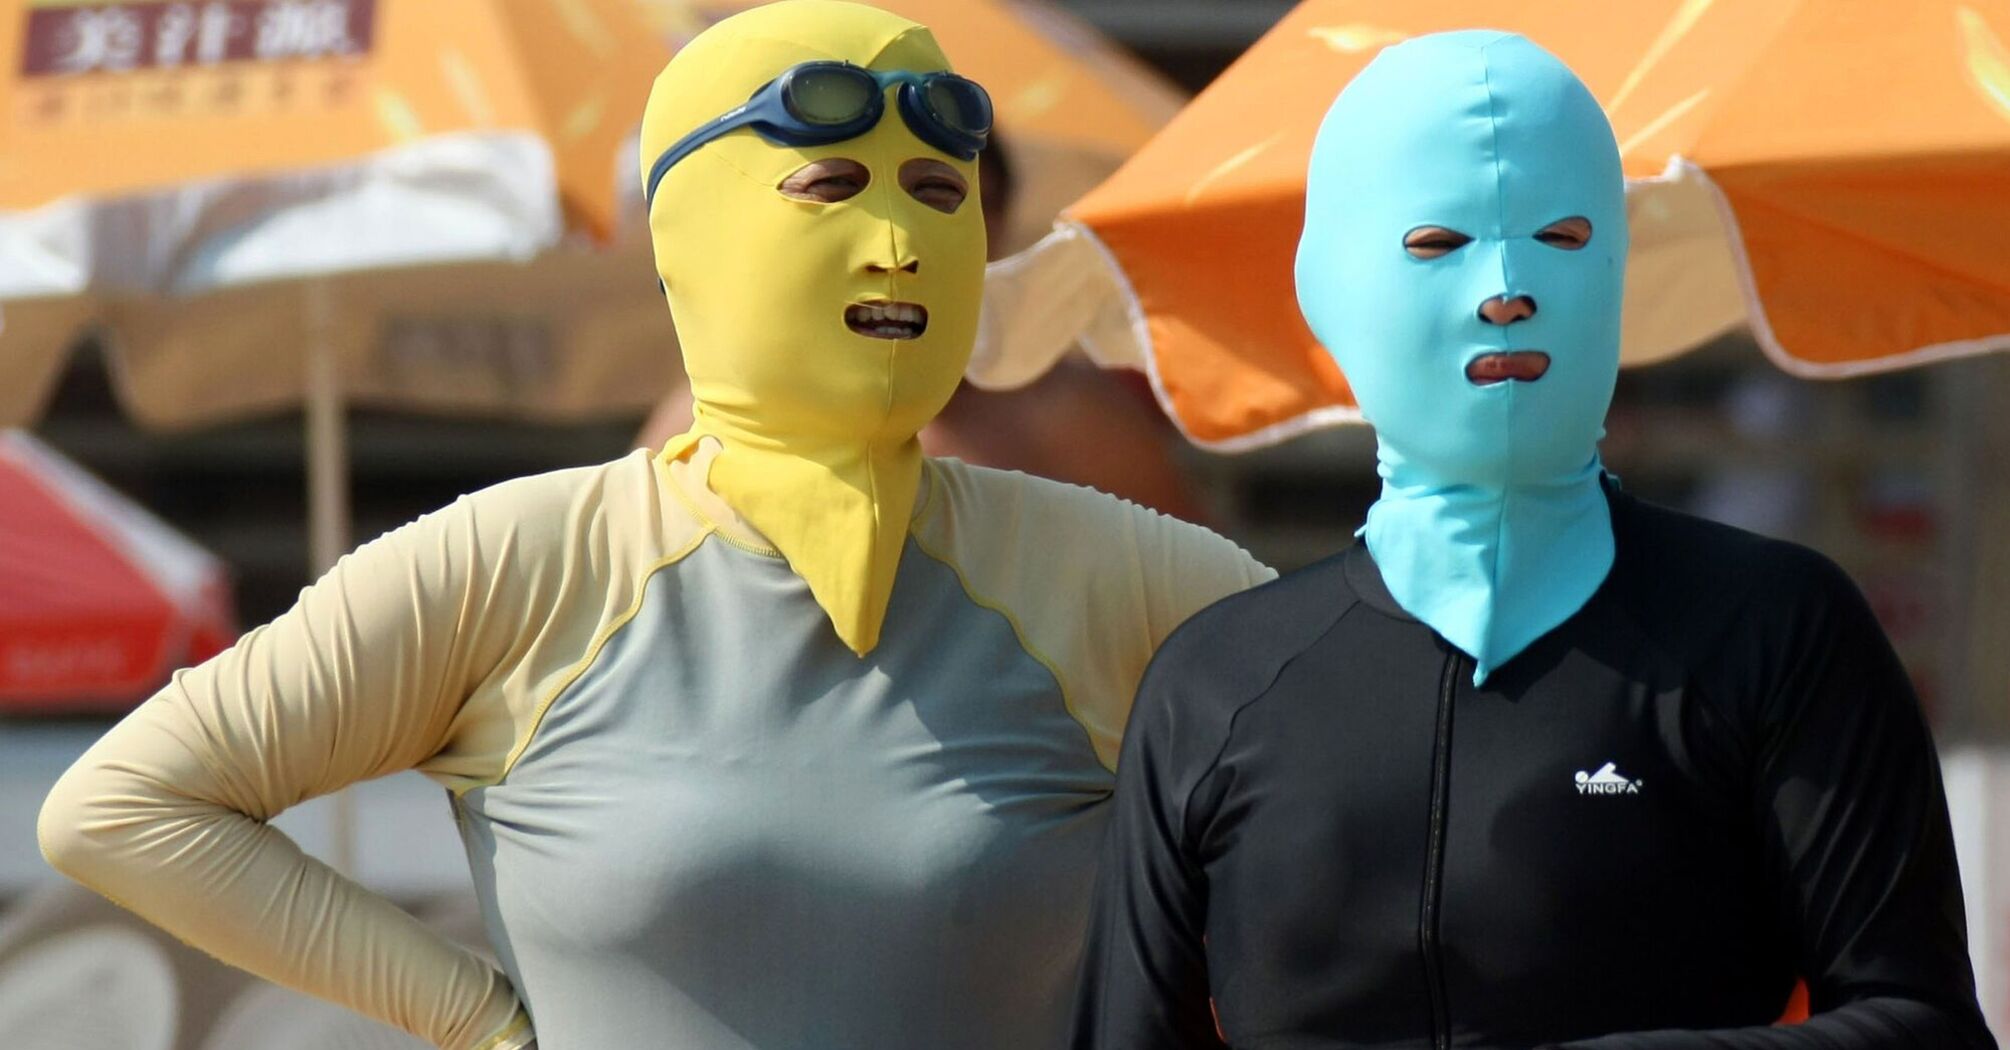 Facekini has become a new trend on Chinese beaches